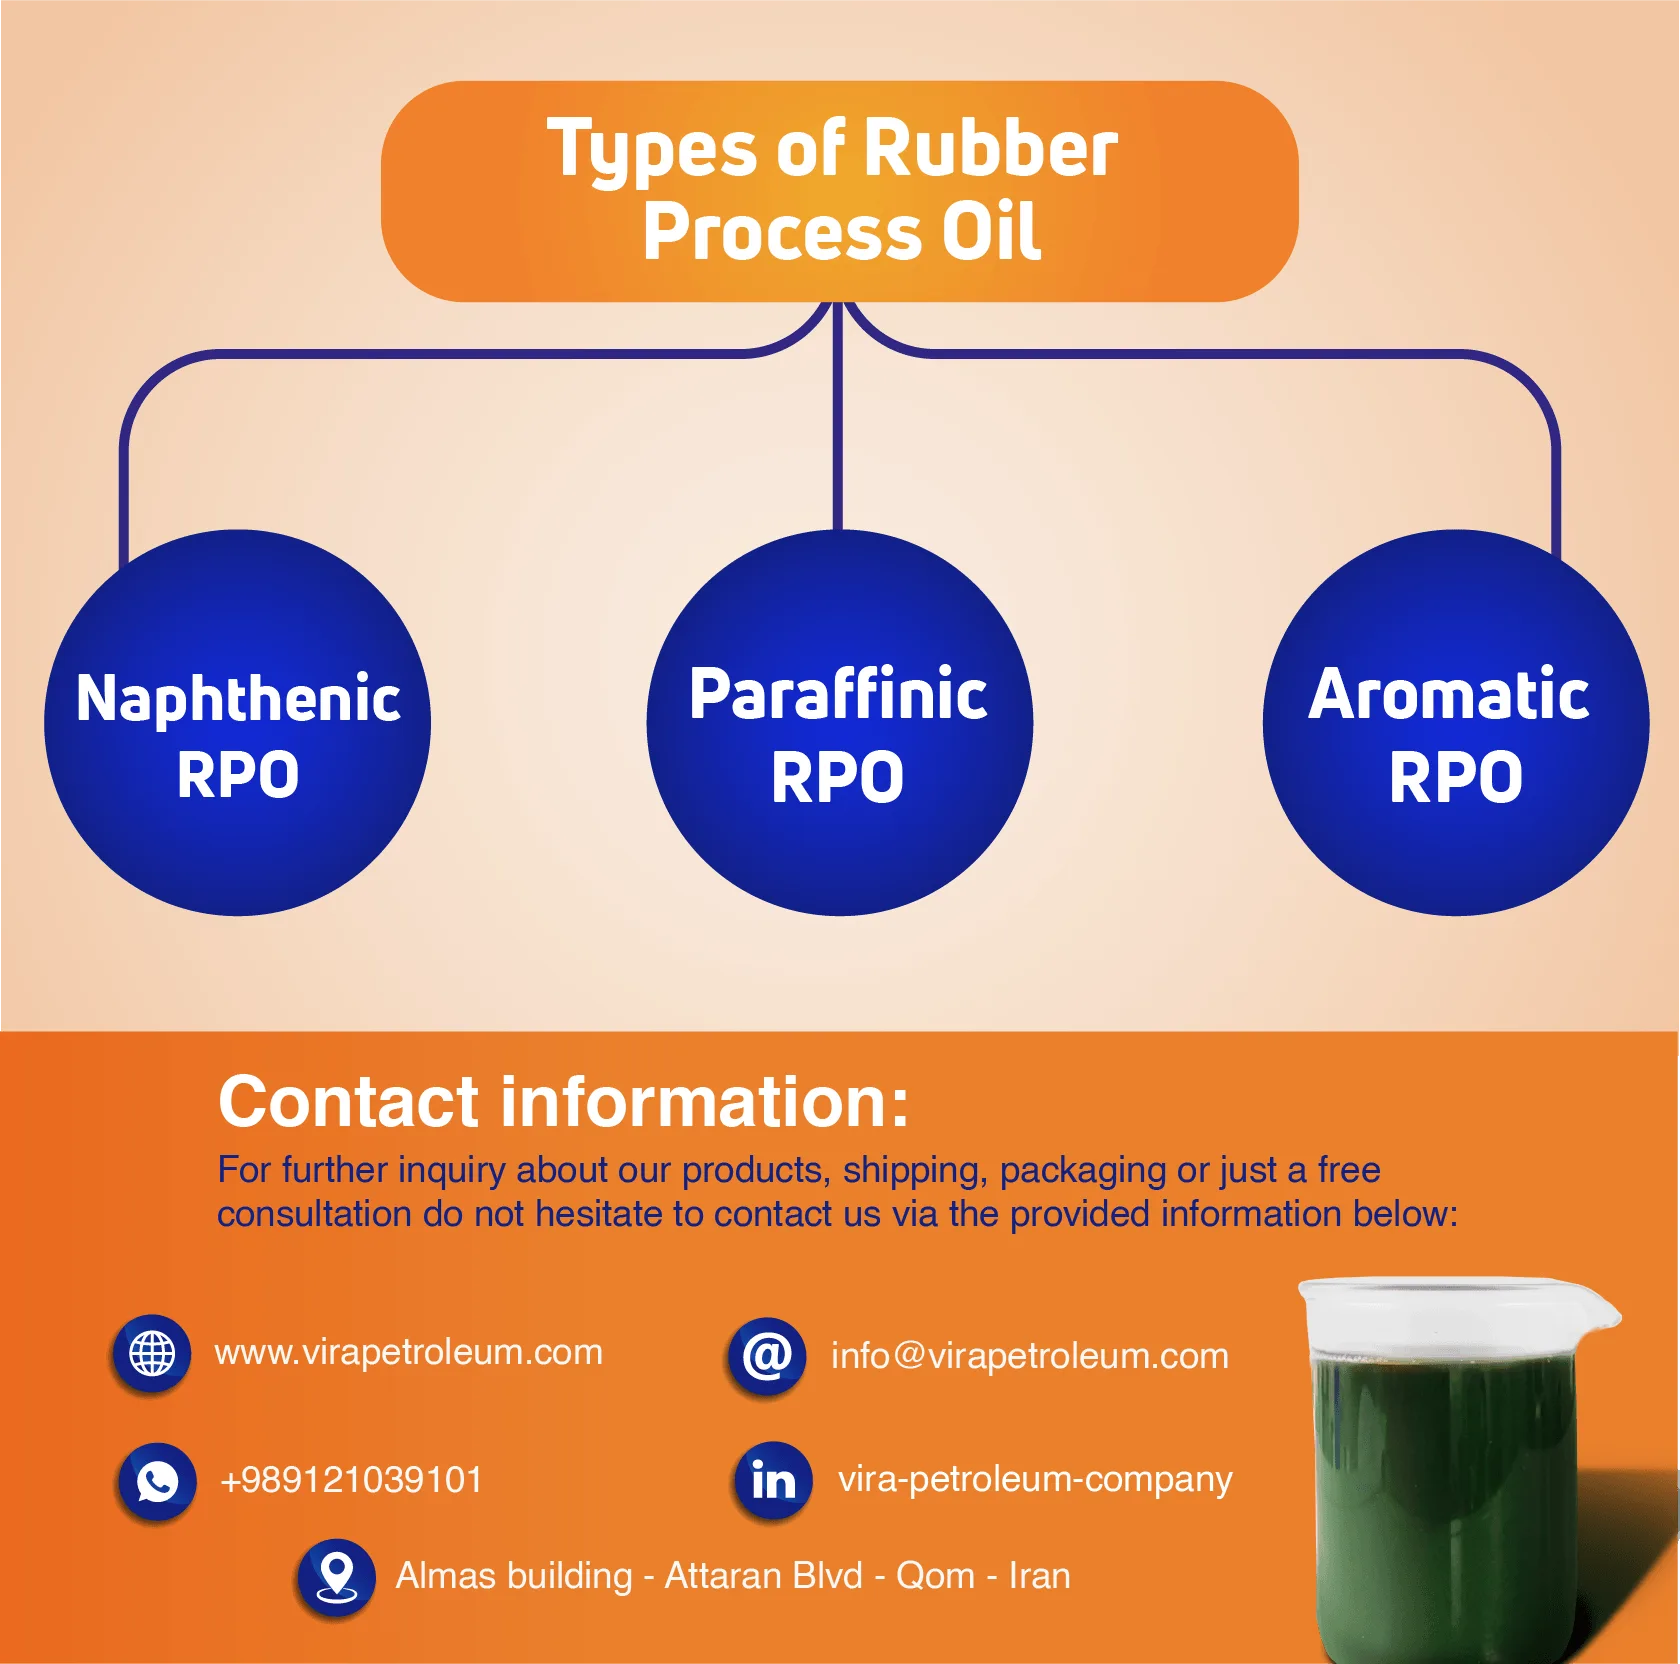 Different Types of Rubber Process Oil